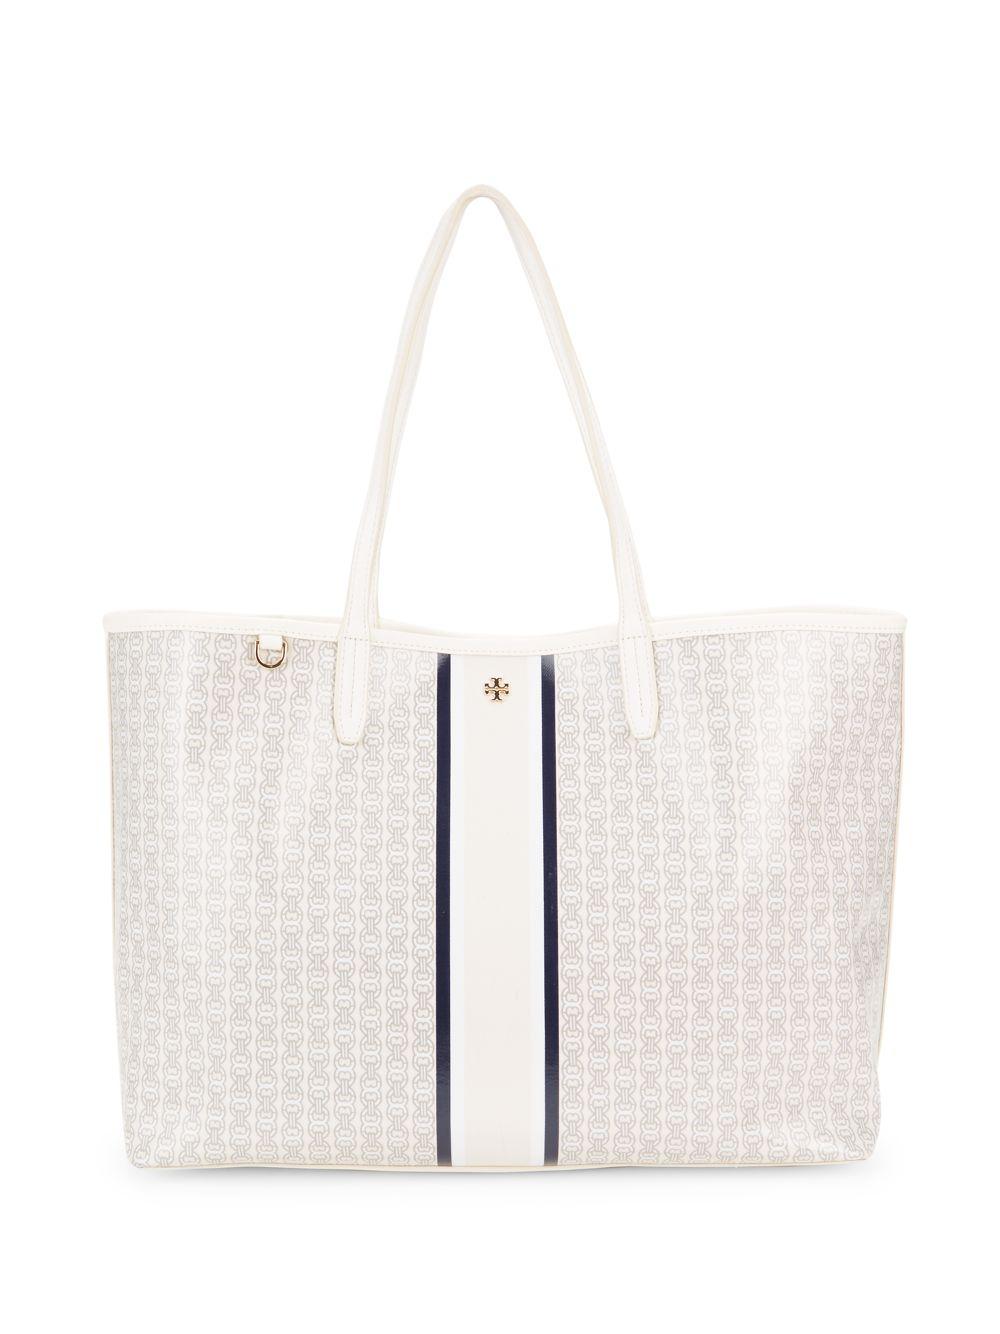 Tory Burch Chain Link Tote 